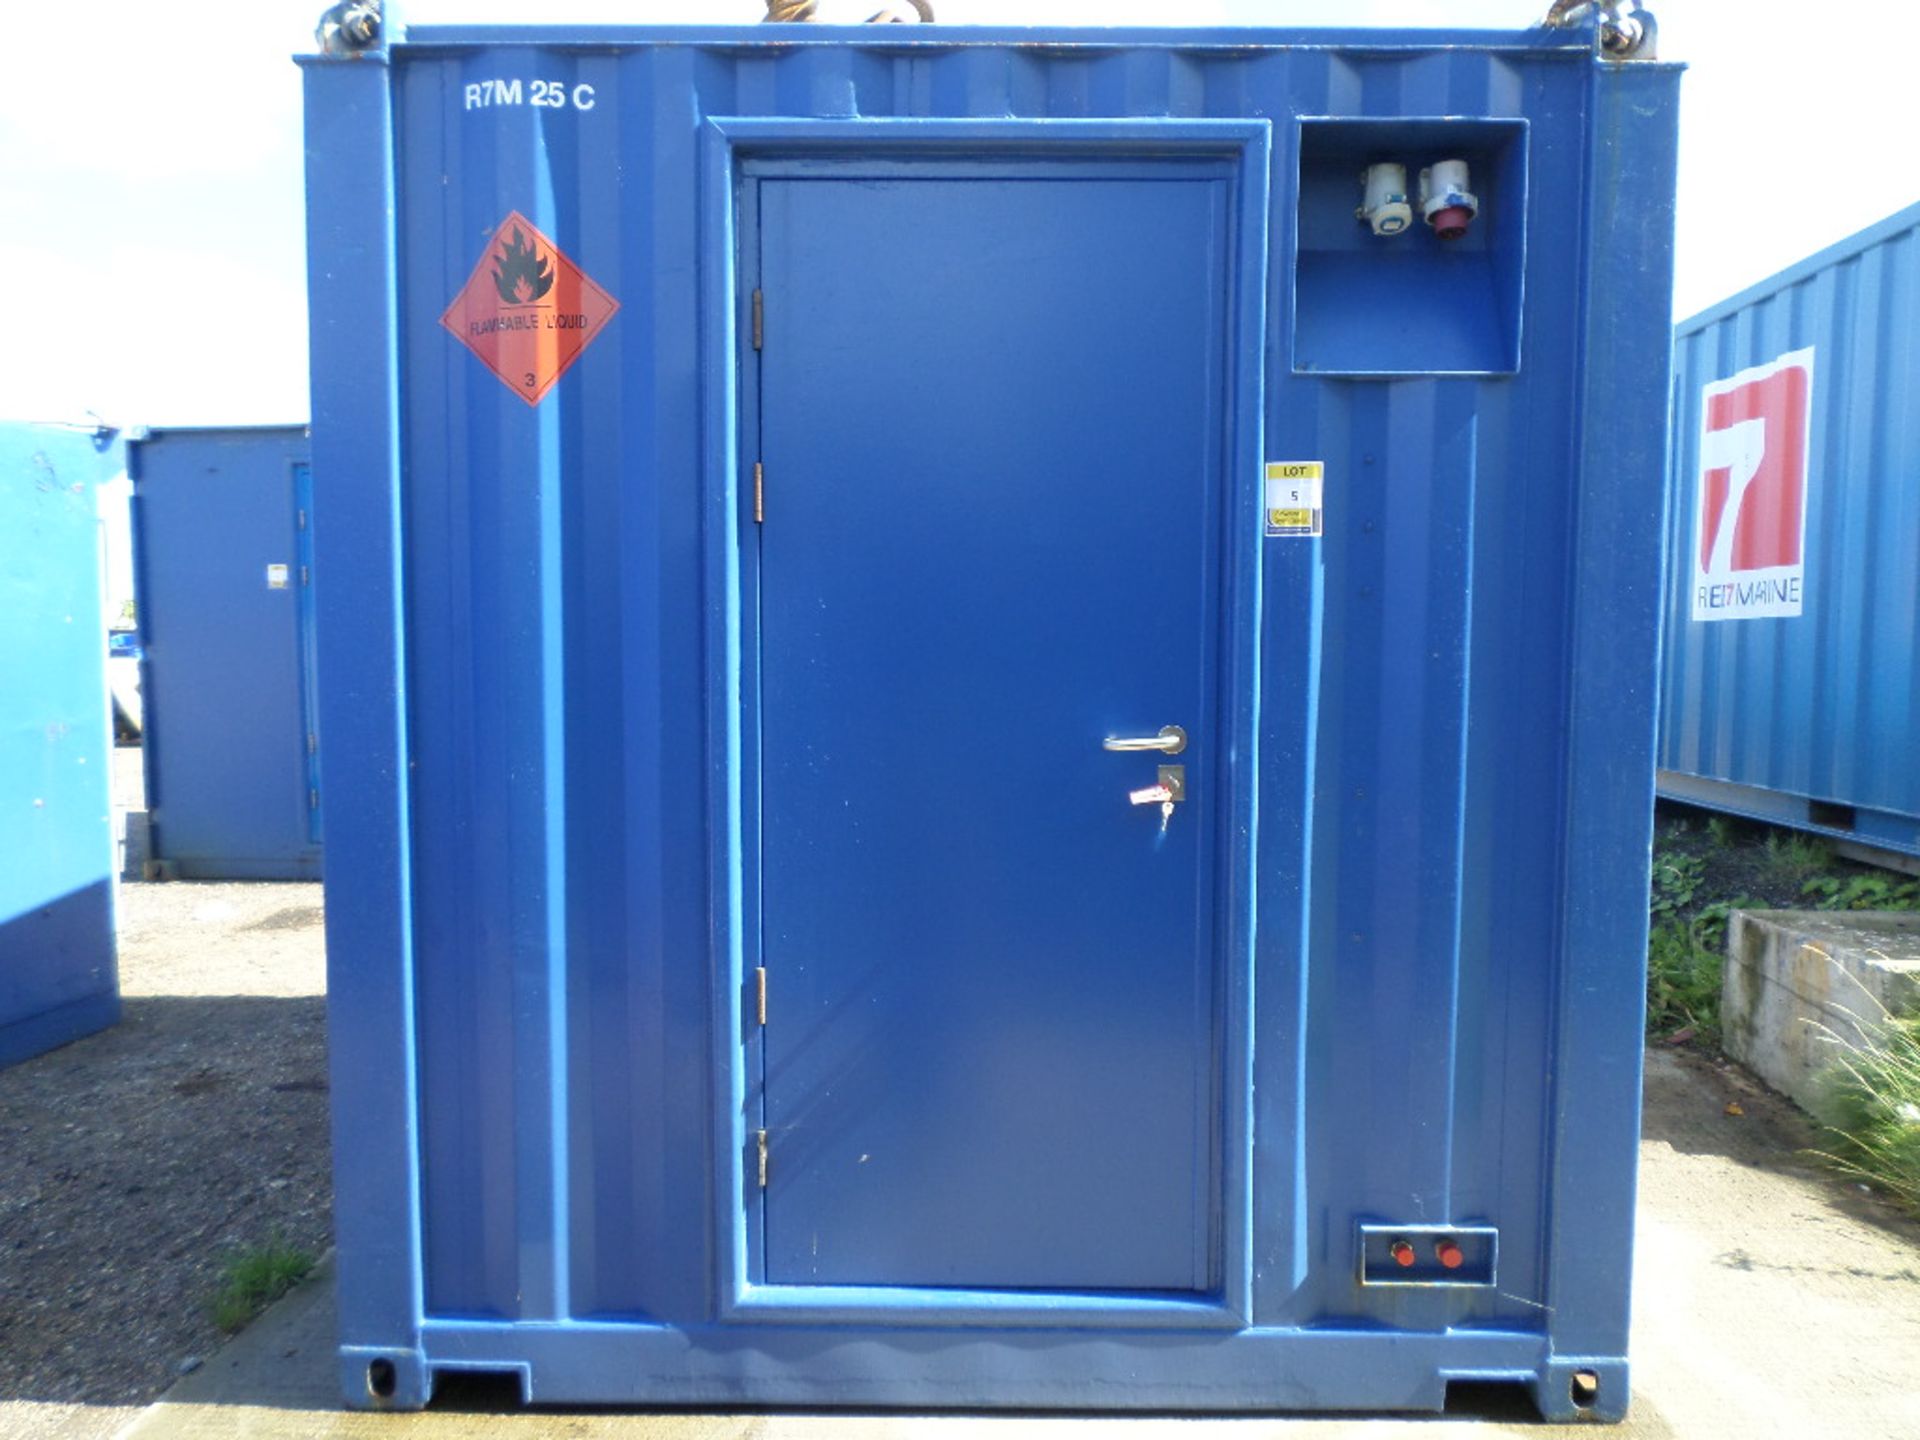 10ft x 8ft divers hot water supply container, IMCA compliant, reference No R7M 25 C  fitted with 2 x